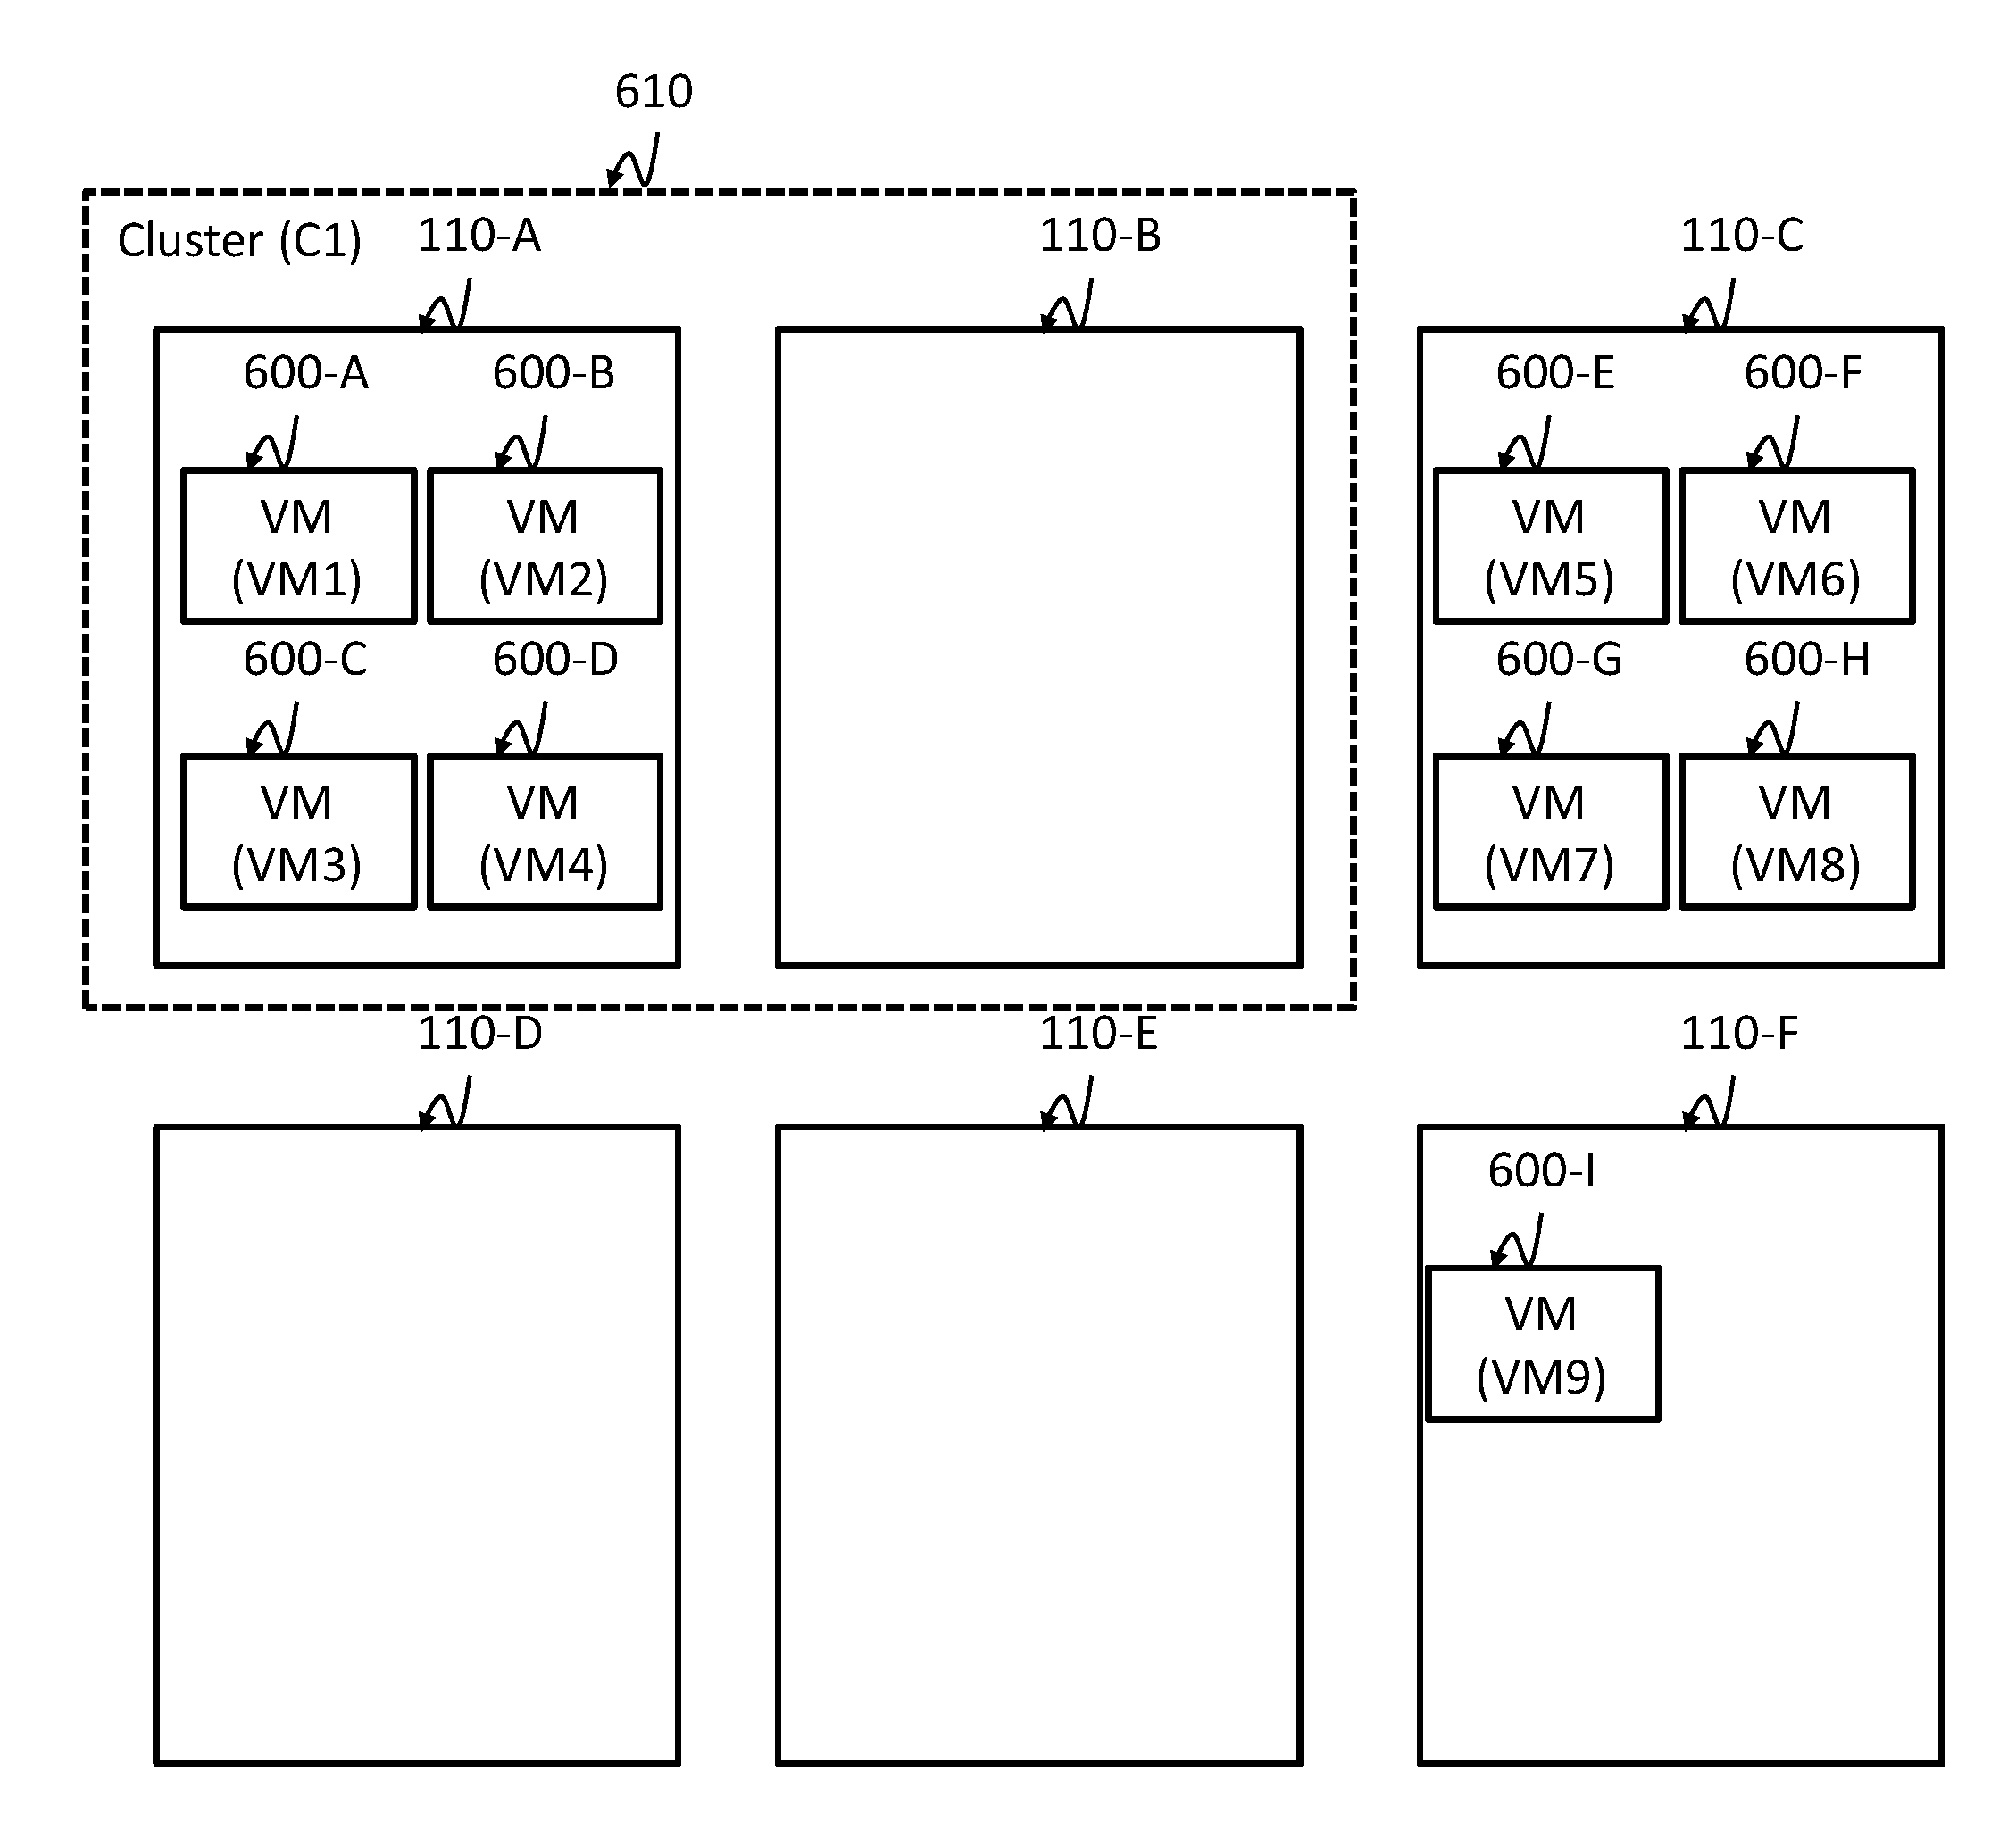 Method and apparatus for maintaining a workload service level on a converged platform